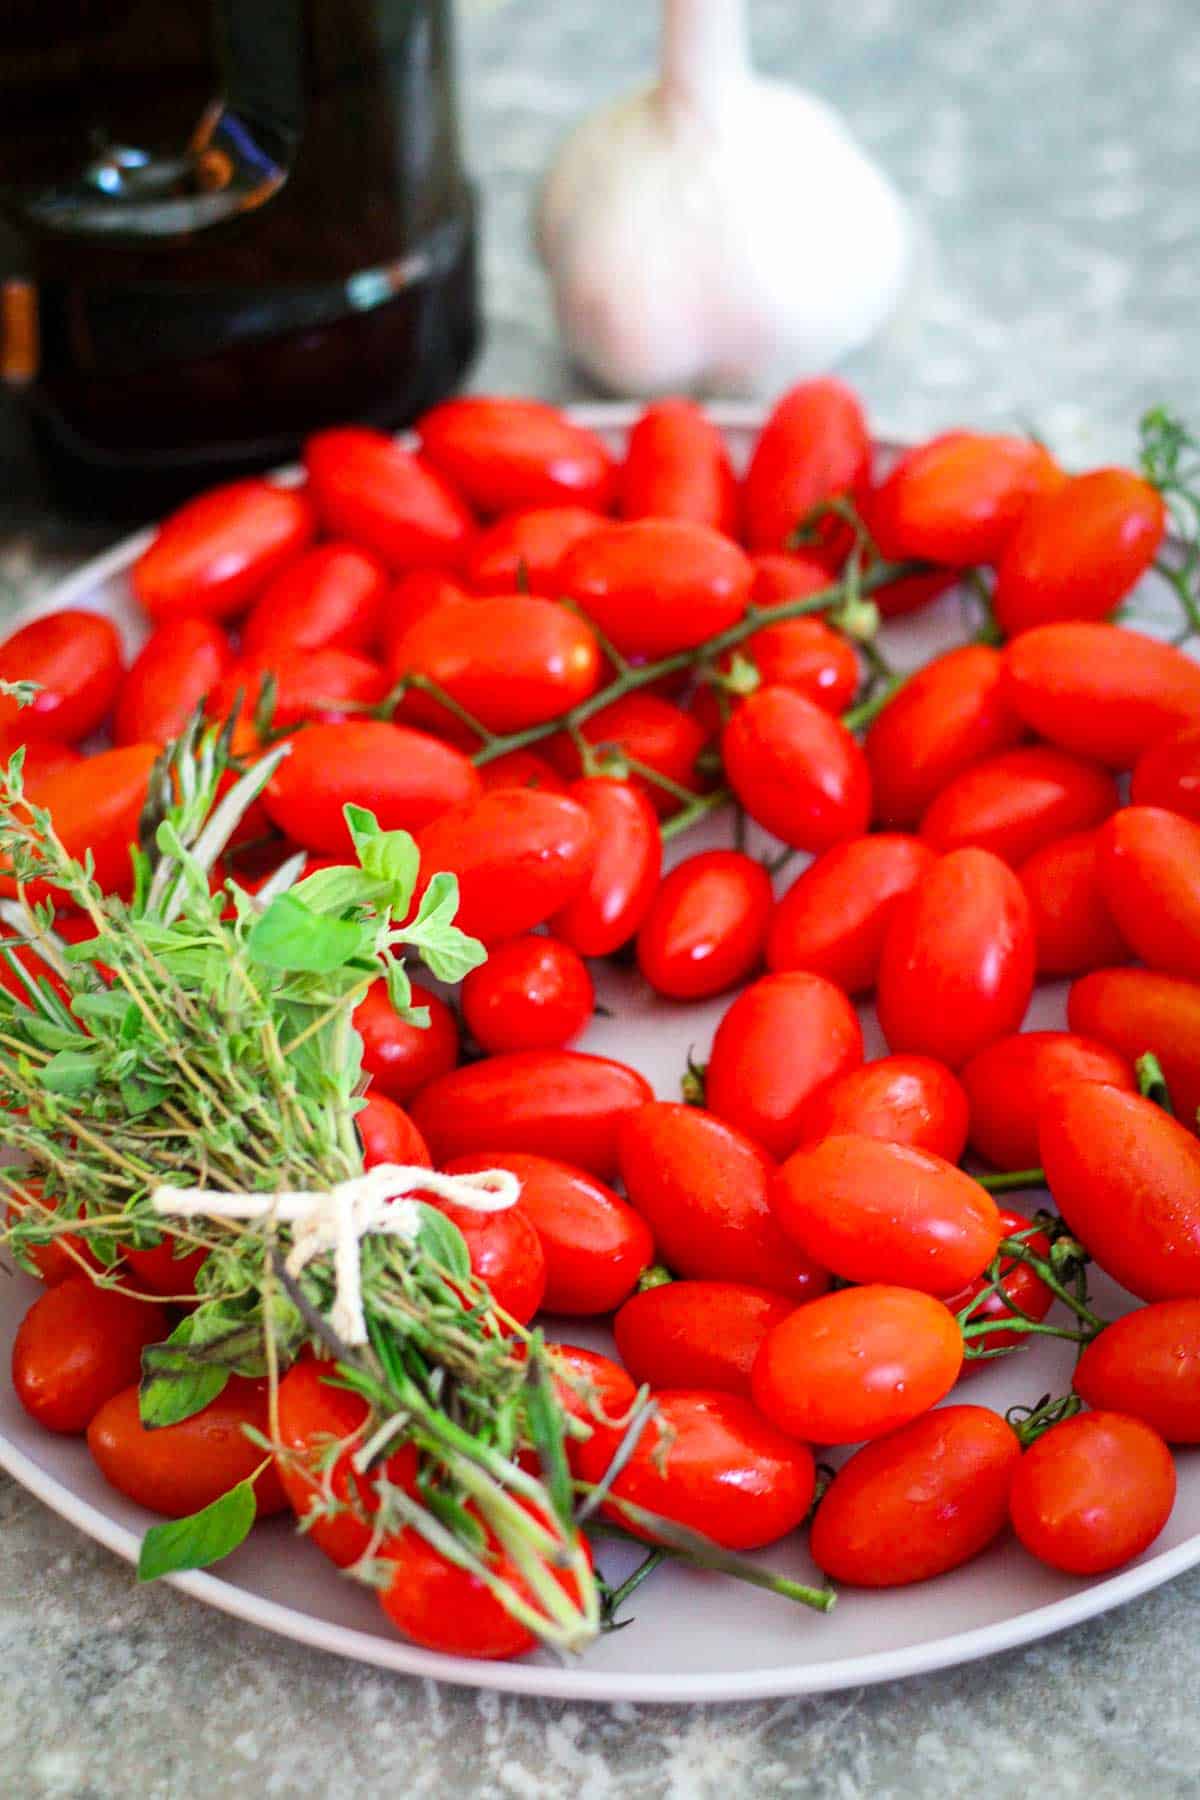 Fresh cherry tomatoes (some still in the vine), a bouquet of herbs tied with twine, garlic and oil are in the background.